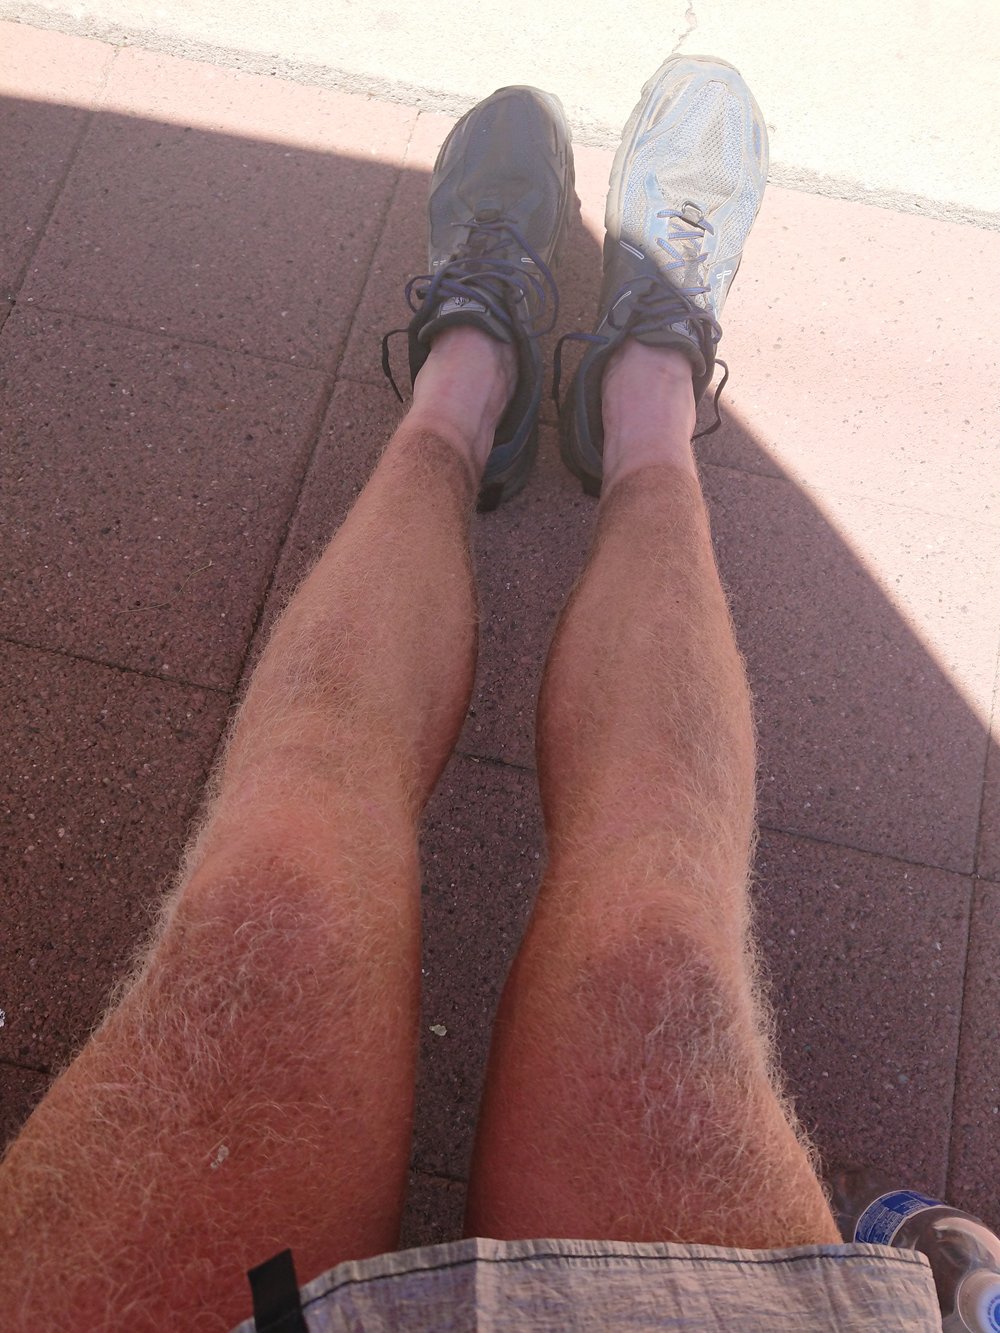  My legs are showing a bit of a hiker tan which is a mix of dirt and sun tan 